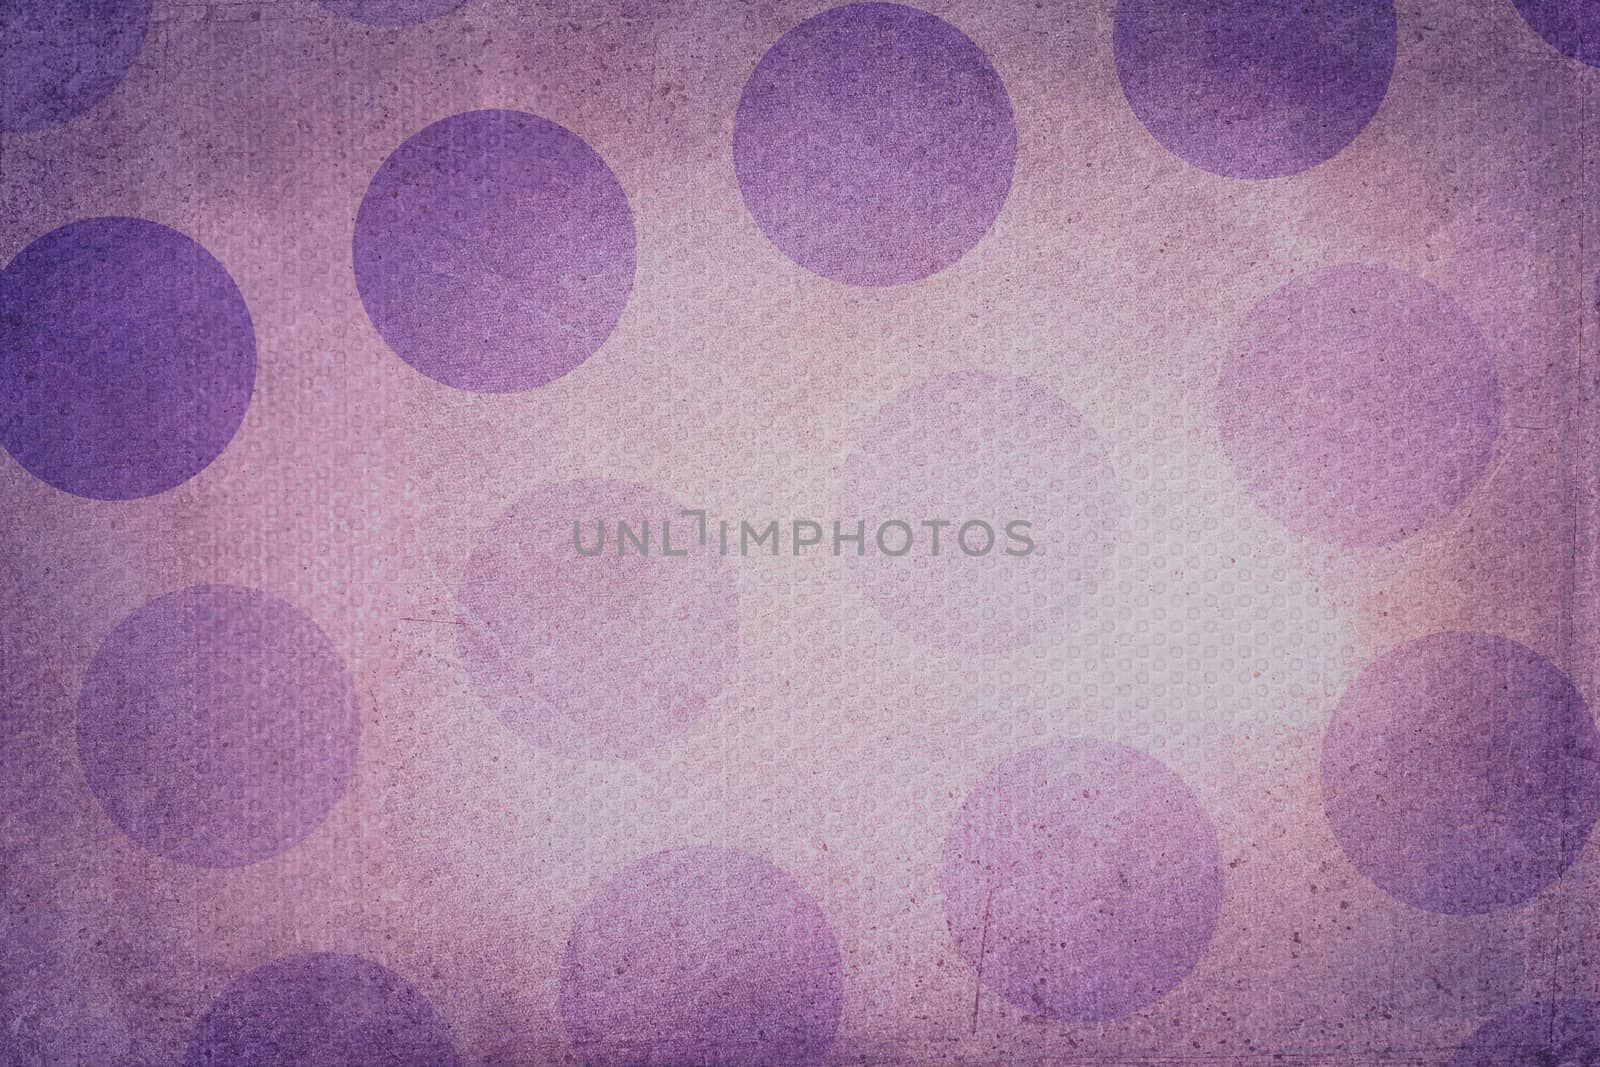 Texture background made of  violet dots, or circles